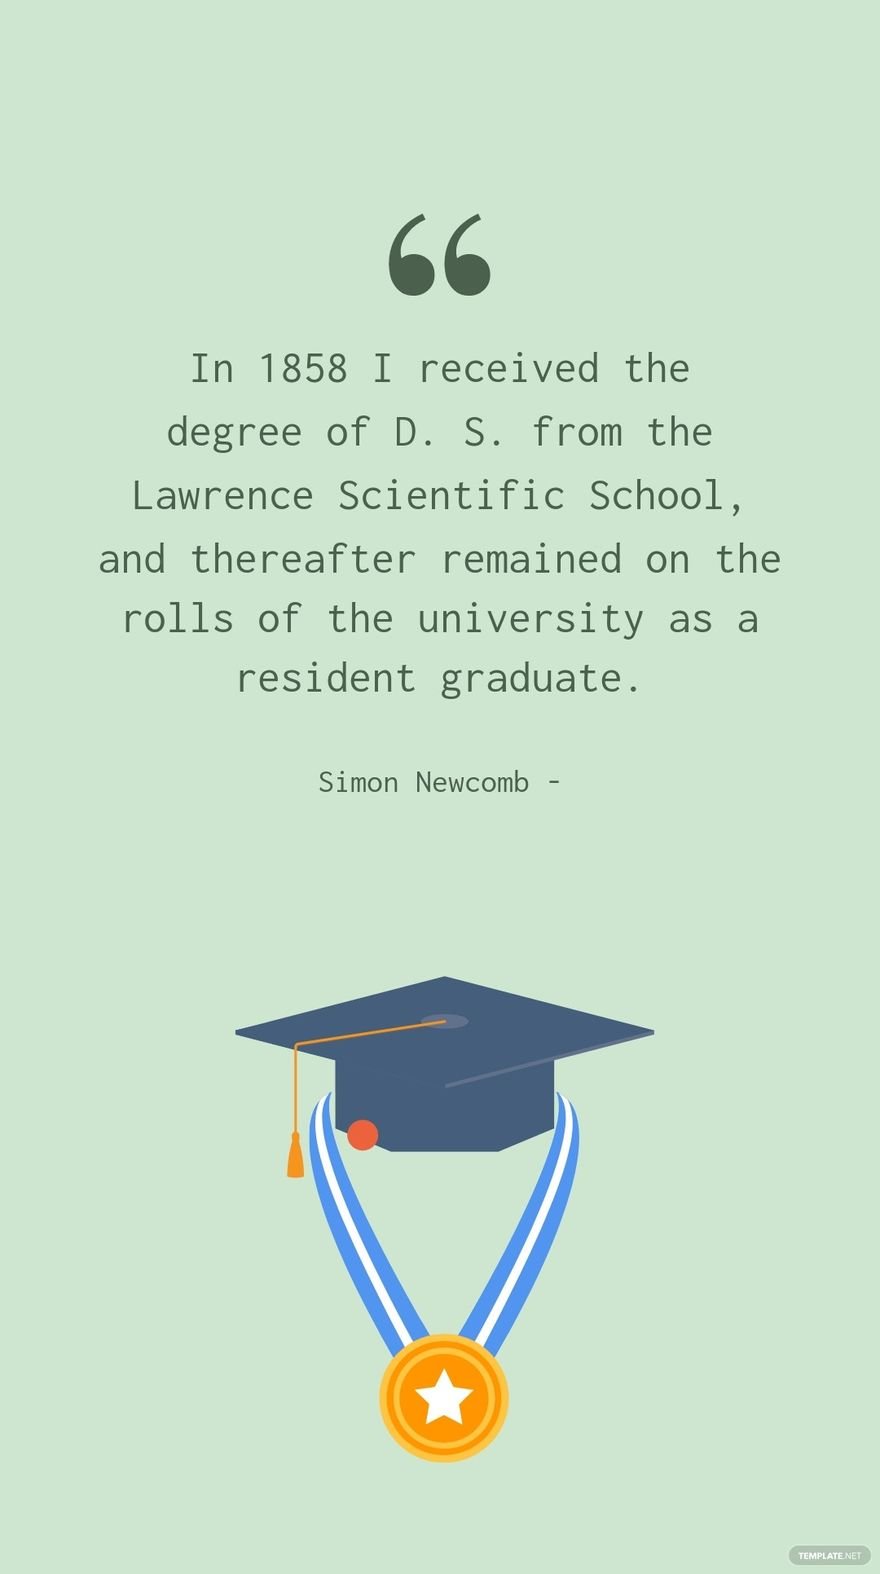 Simon Newcomb - In 1858 I received the degree of D. S. from the Lawrence Scientific School, and thereafter remained on the rolls of the university as a resident graduate.